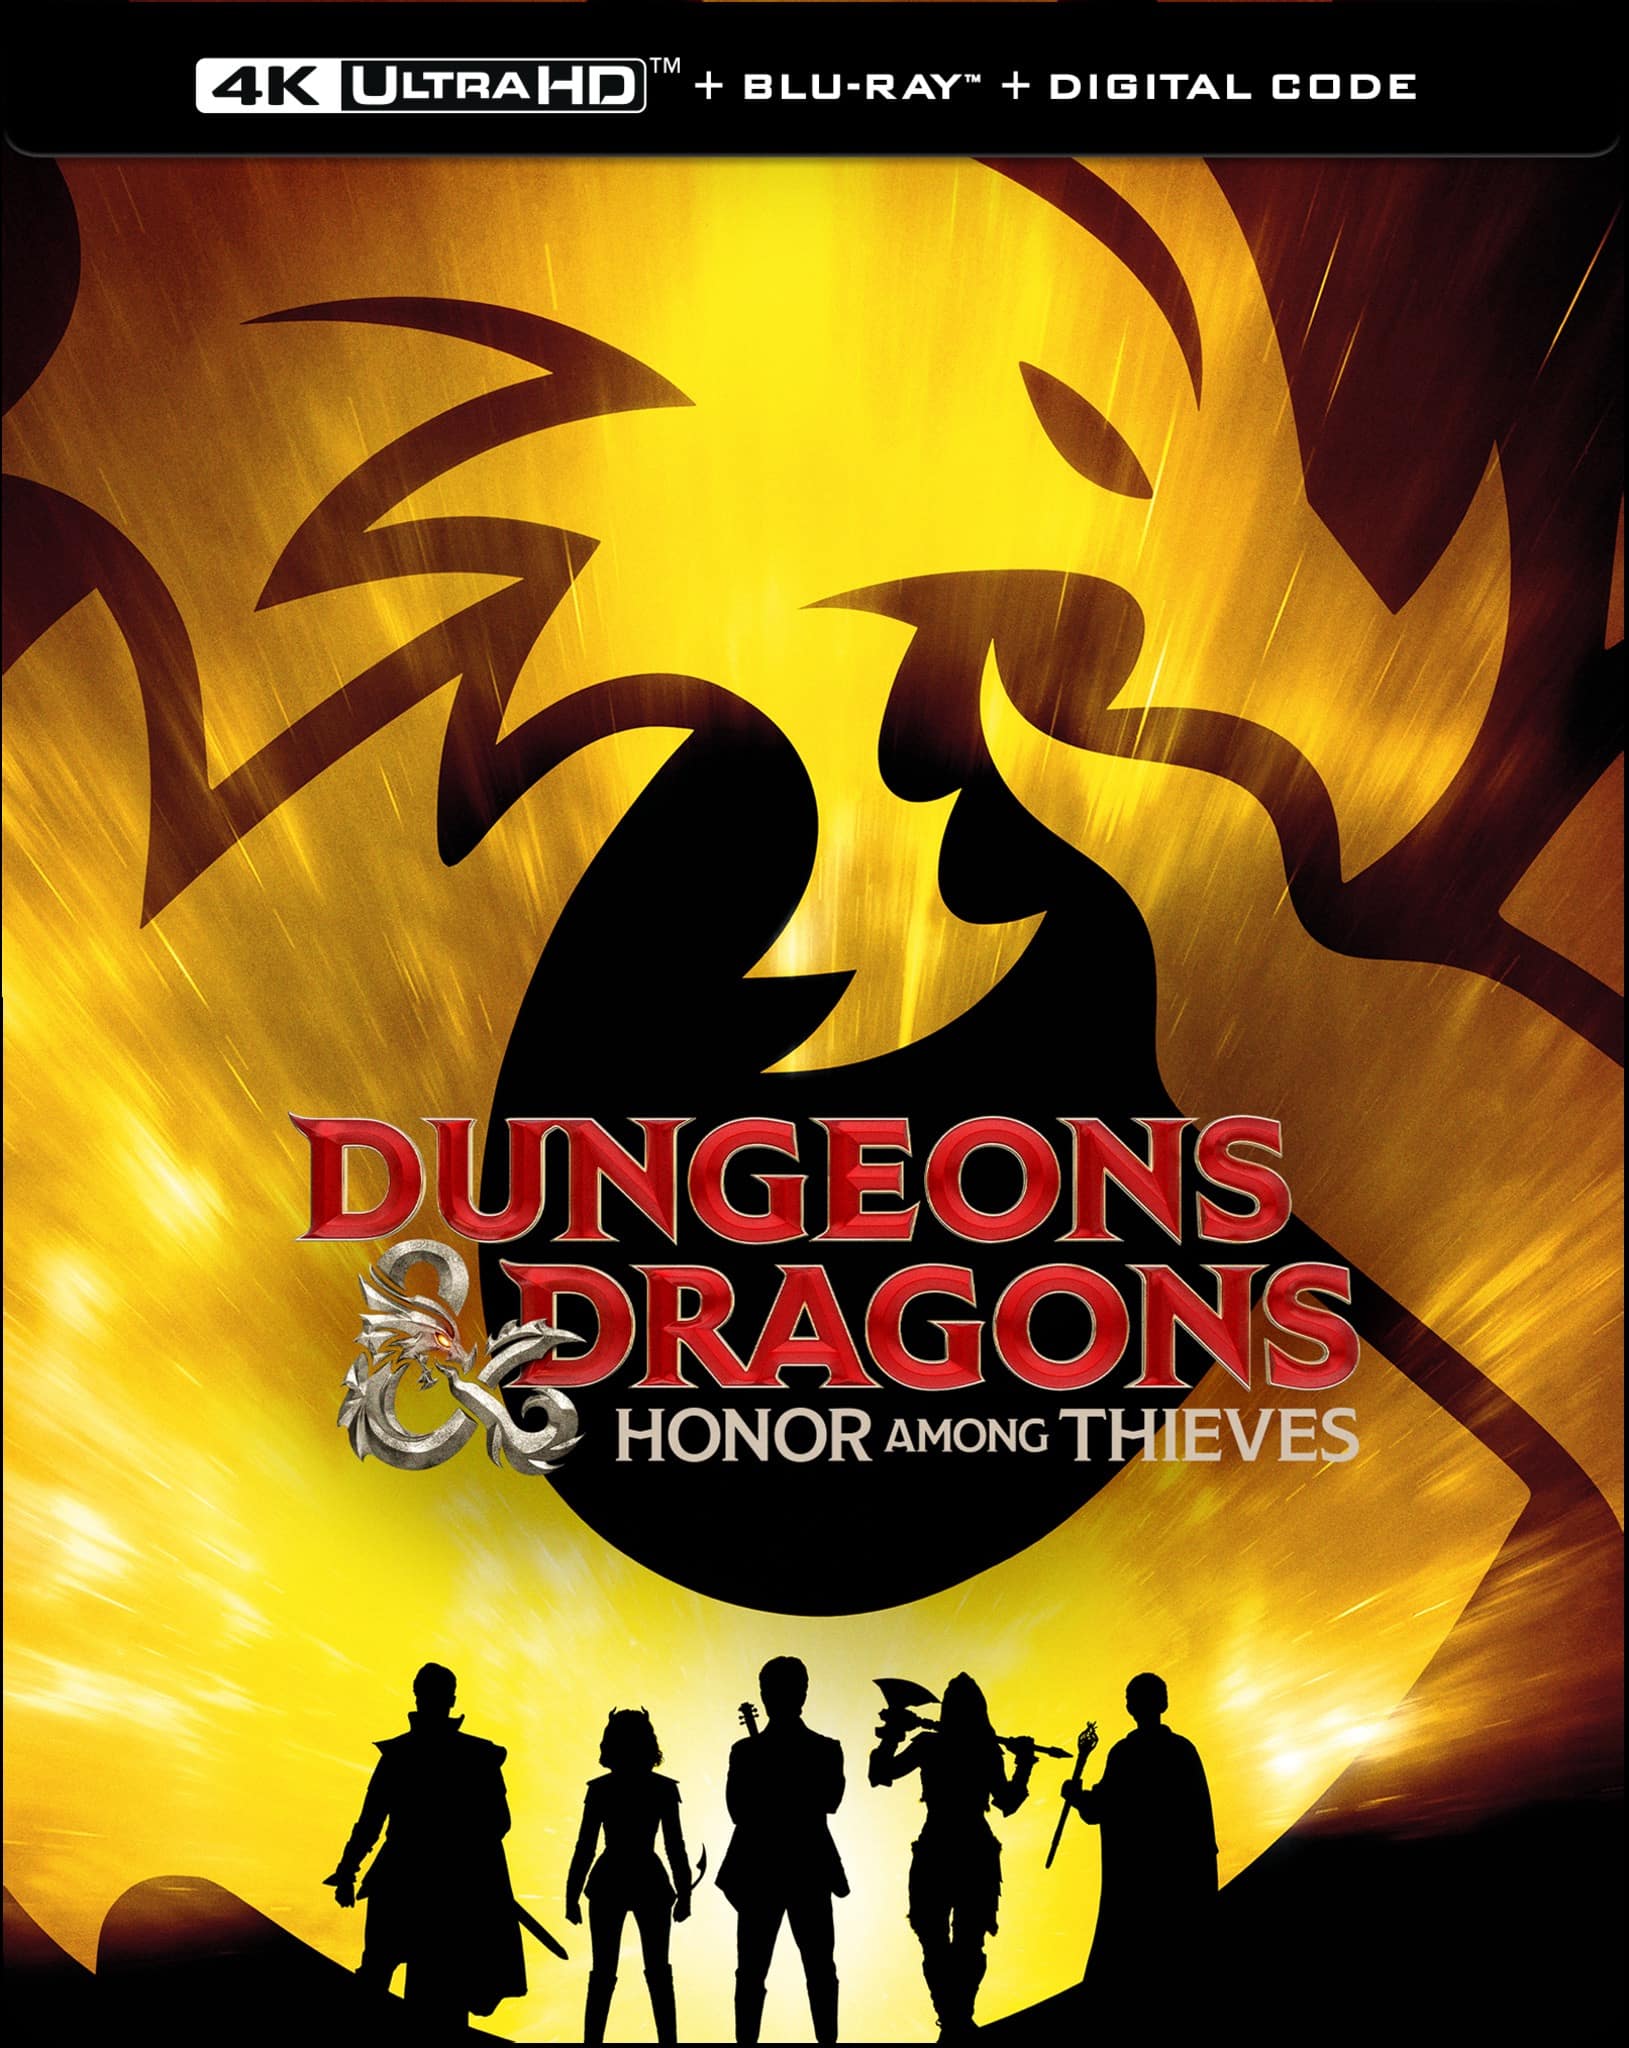 Dungeons & Dragons Honor Among Thieves Bonus Features